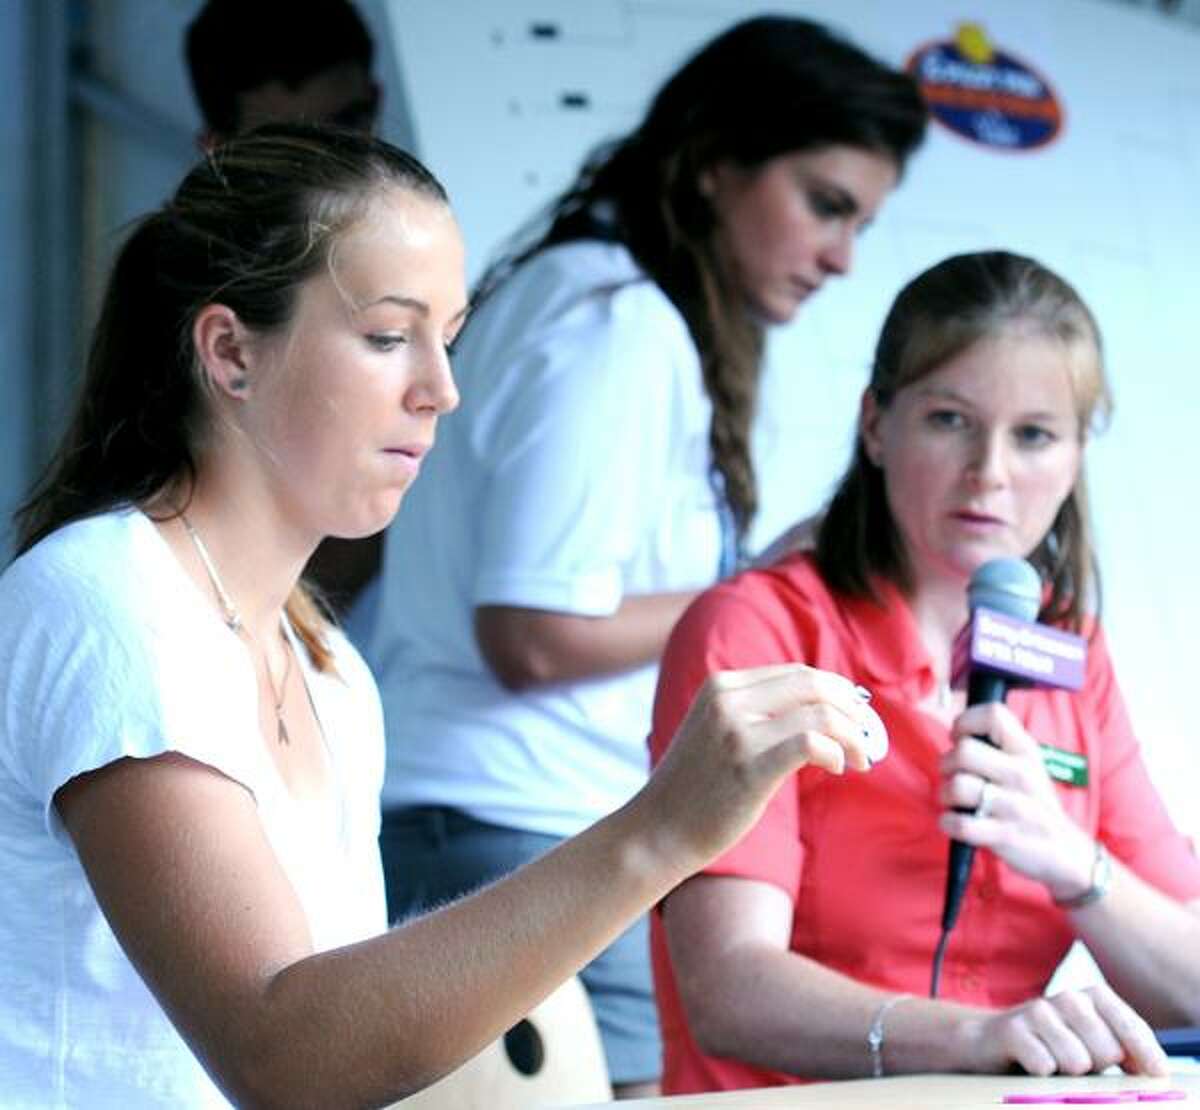 Anastasia Pavlyuchenkova (left) and WTA tour supervisor Melanie Tabb (right) begin the women's draw at the Pilot Pen tennis tournament in New Haven on 8/20/2010. At center is assistant Brittany Allen.Photo by Arnold Gold AG0382B